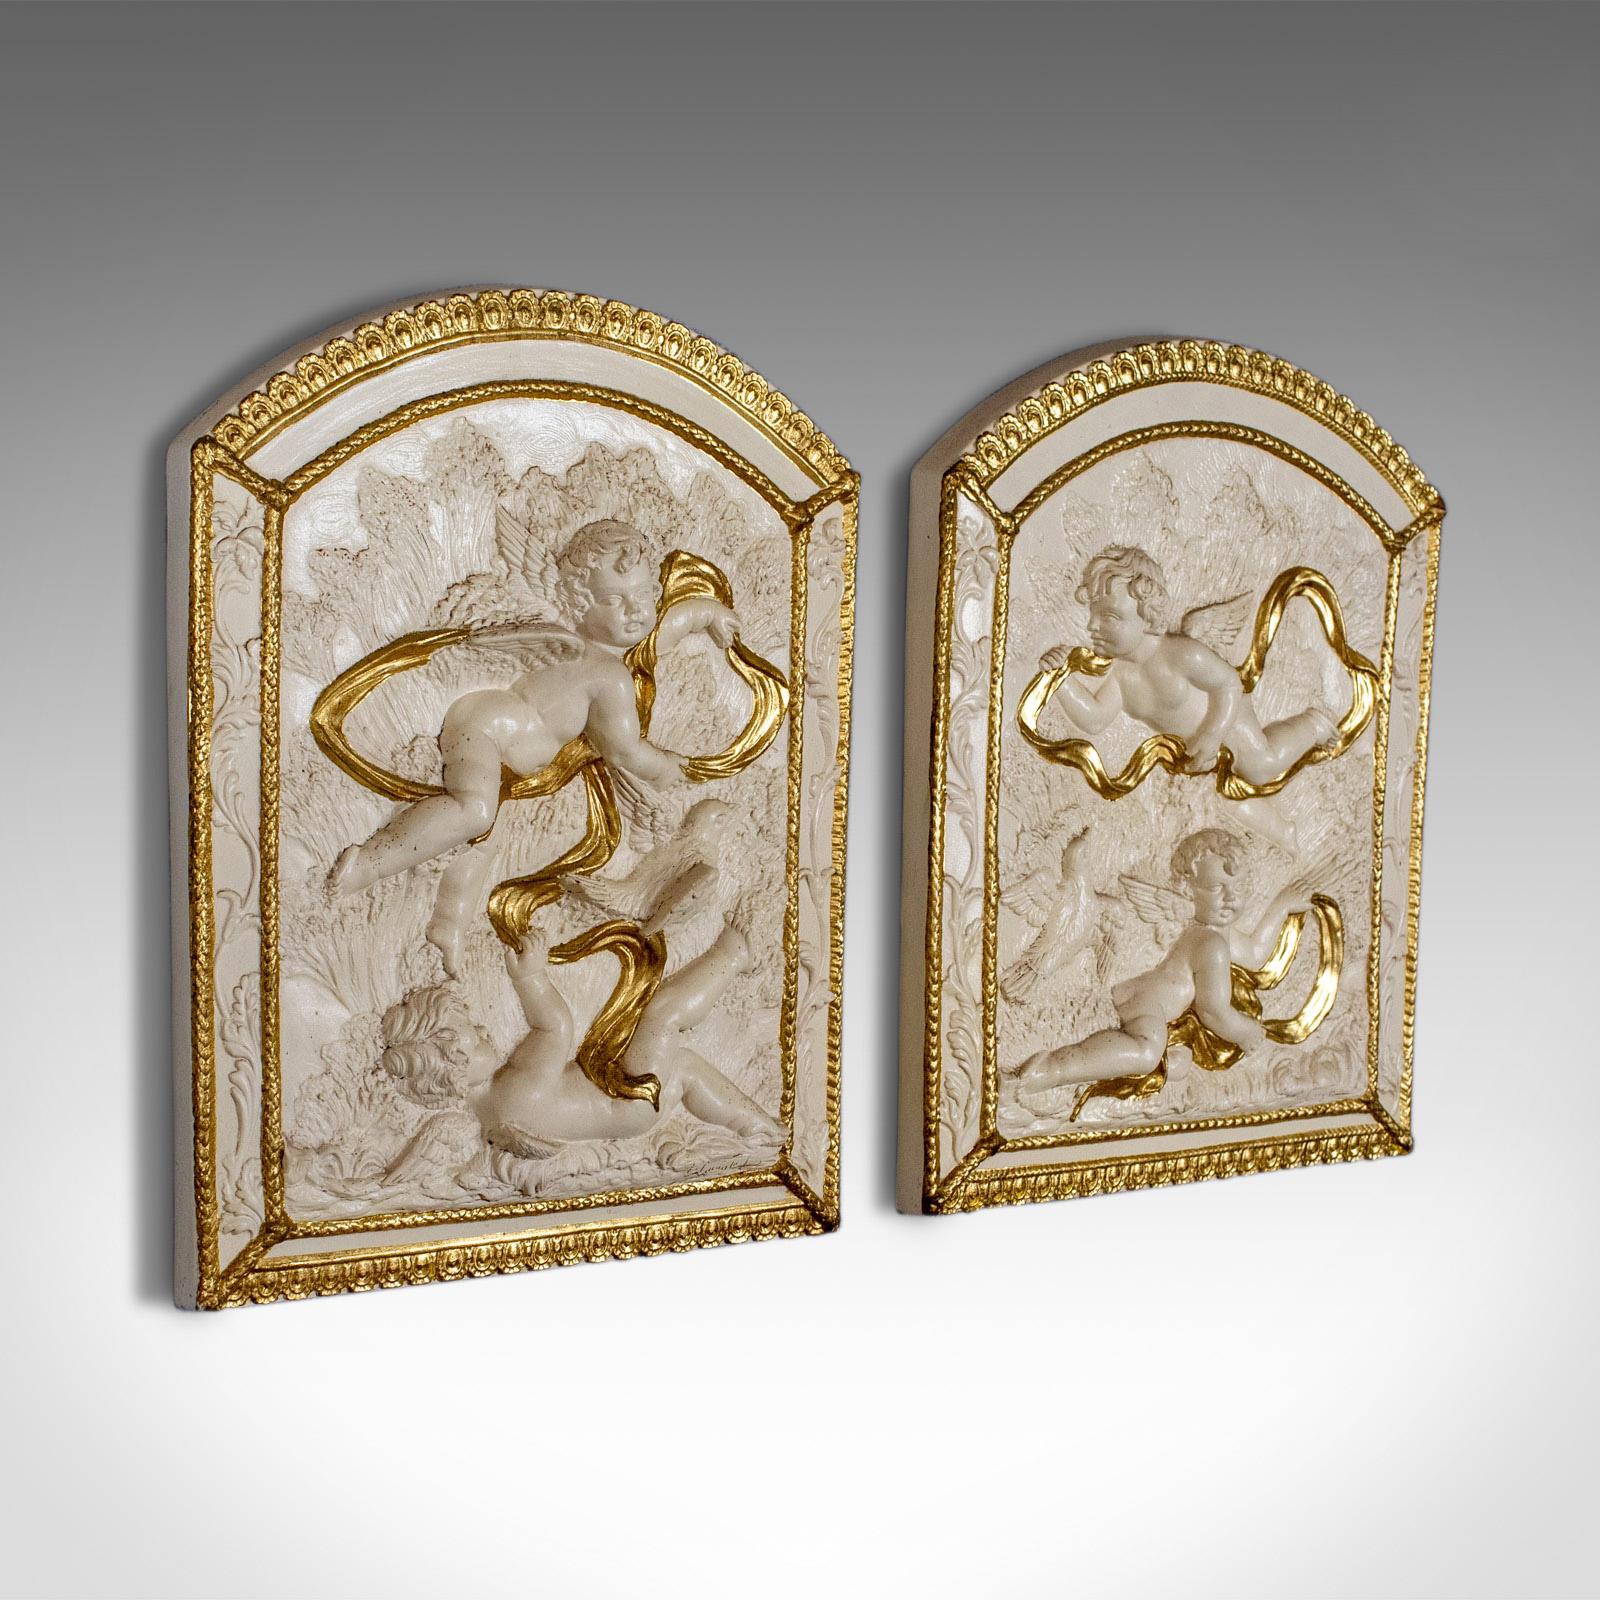 This is a pair of decorative panels, plaster reliefs of putti, or cherubs, highlighted in gold. Plaques dating to the late 20th century.

Beautifully detailed plaster panels
Profusely decorated and highlighted in gold
Classical scenes of putti,